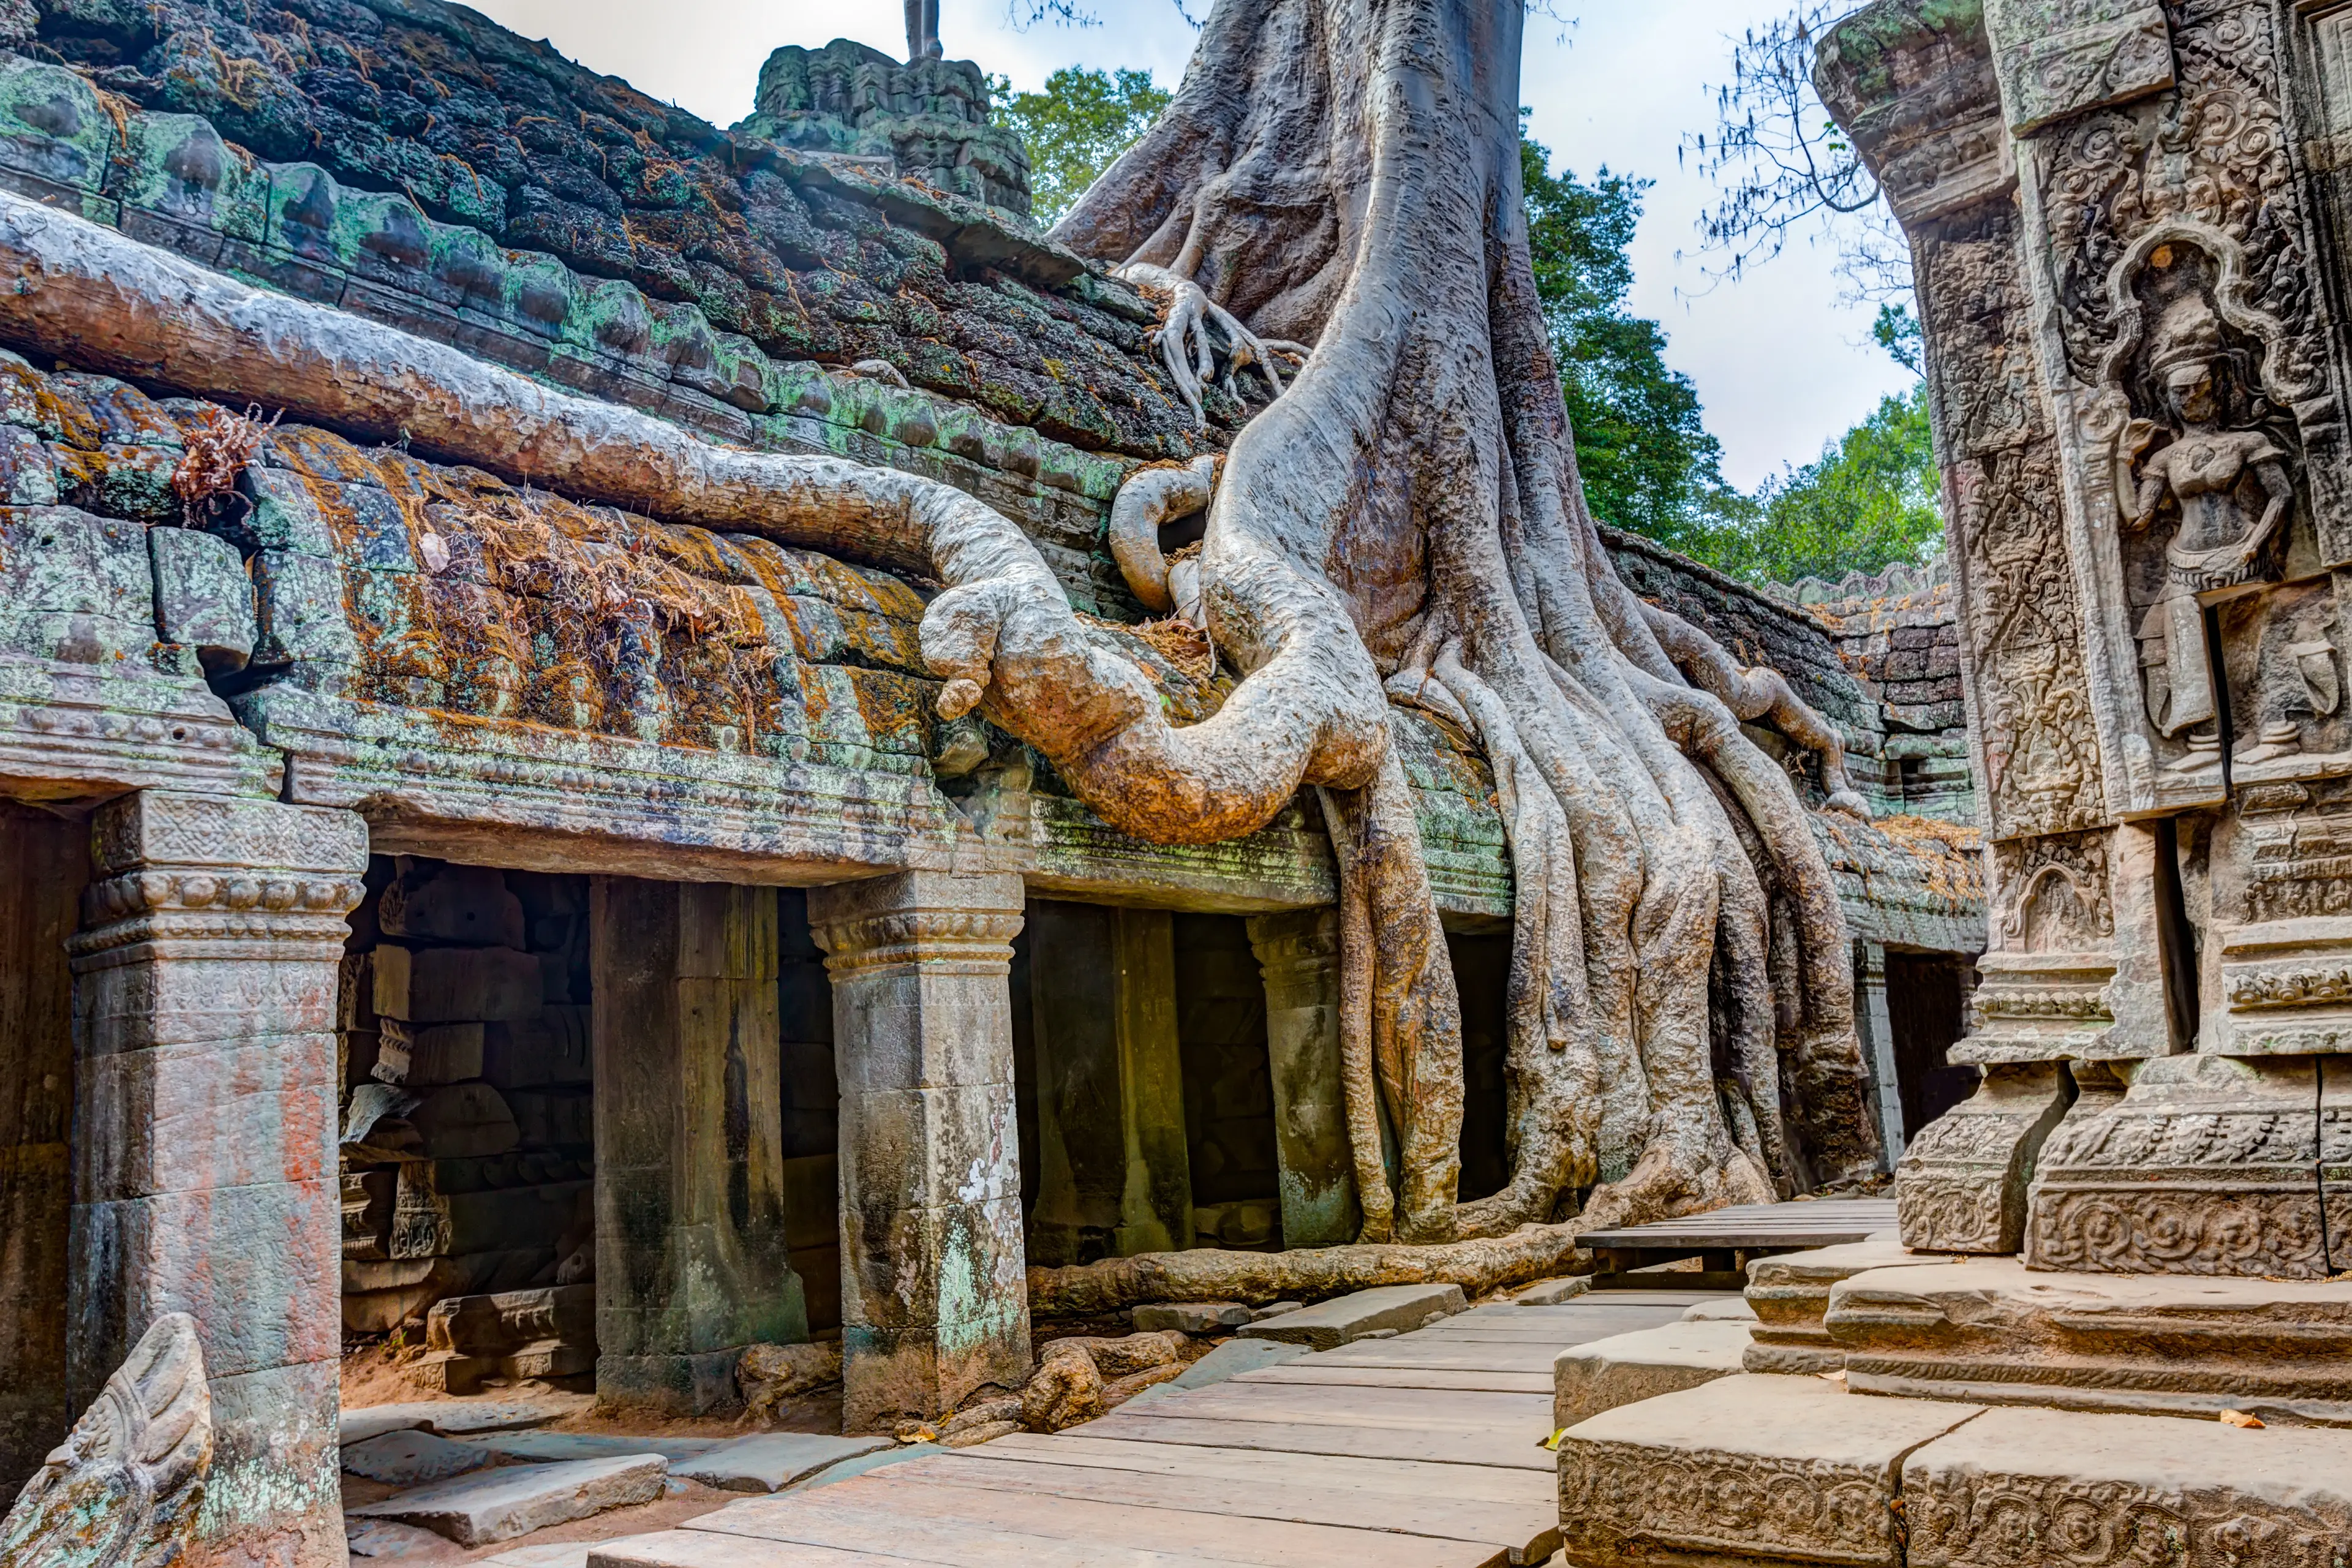 1-Day Angkor Wat Exploration: Sightseeing, Food, and Wine for Locals